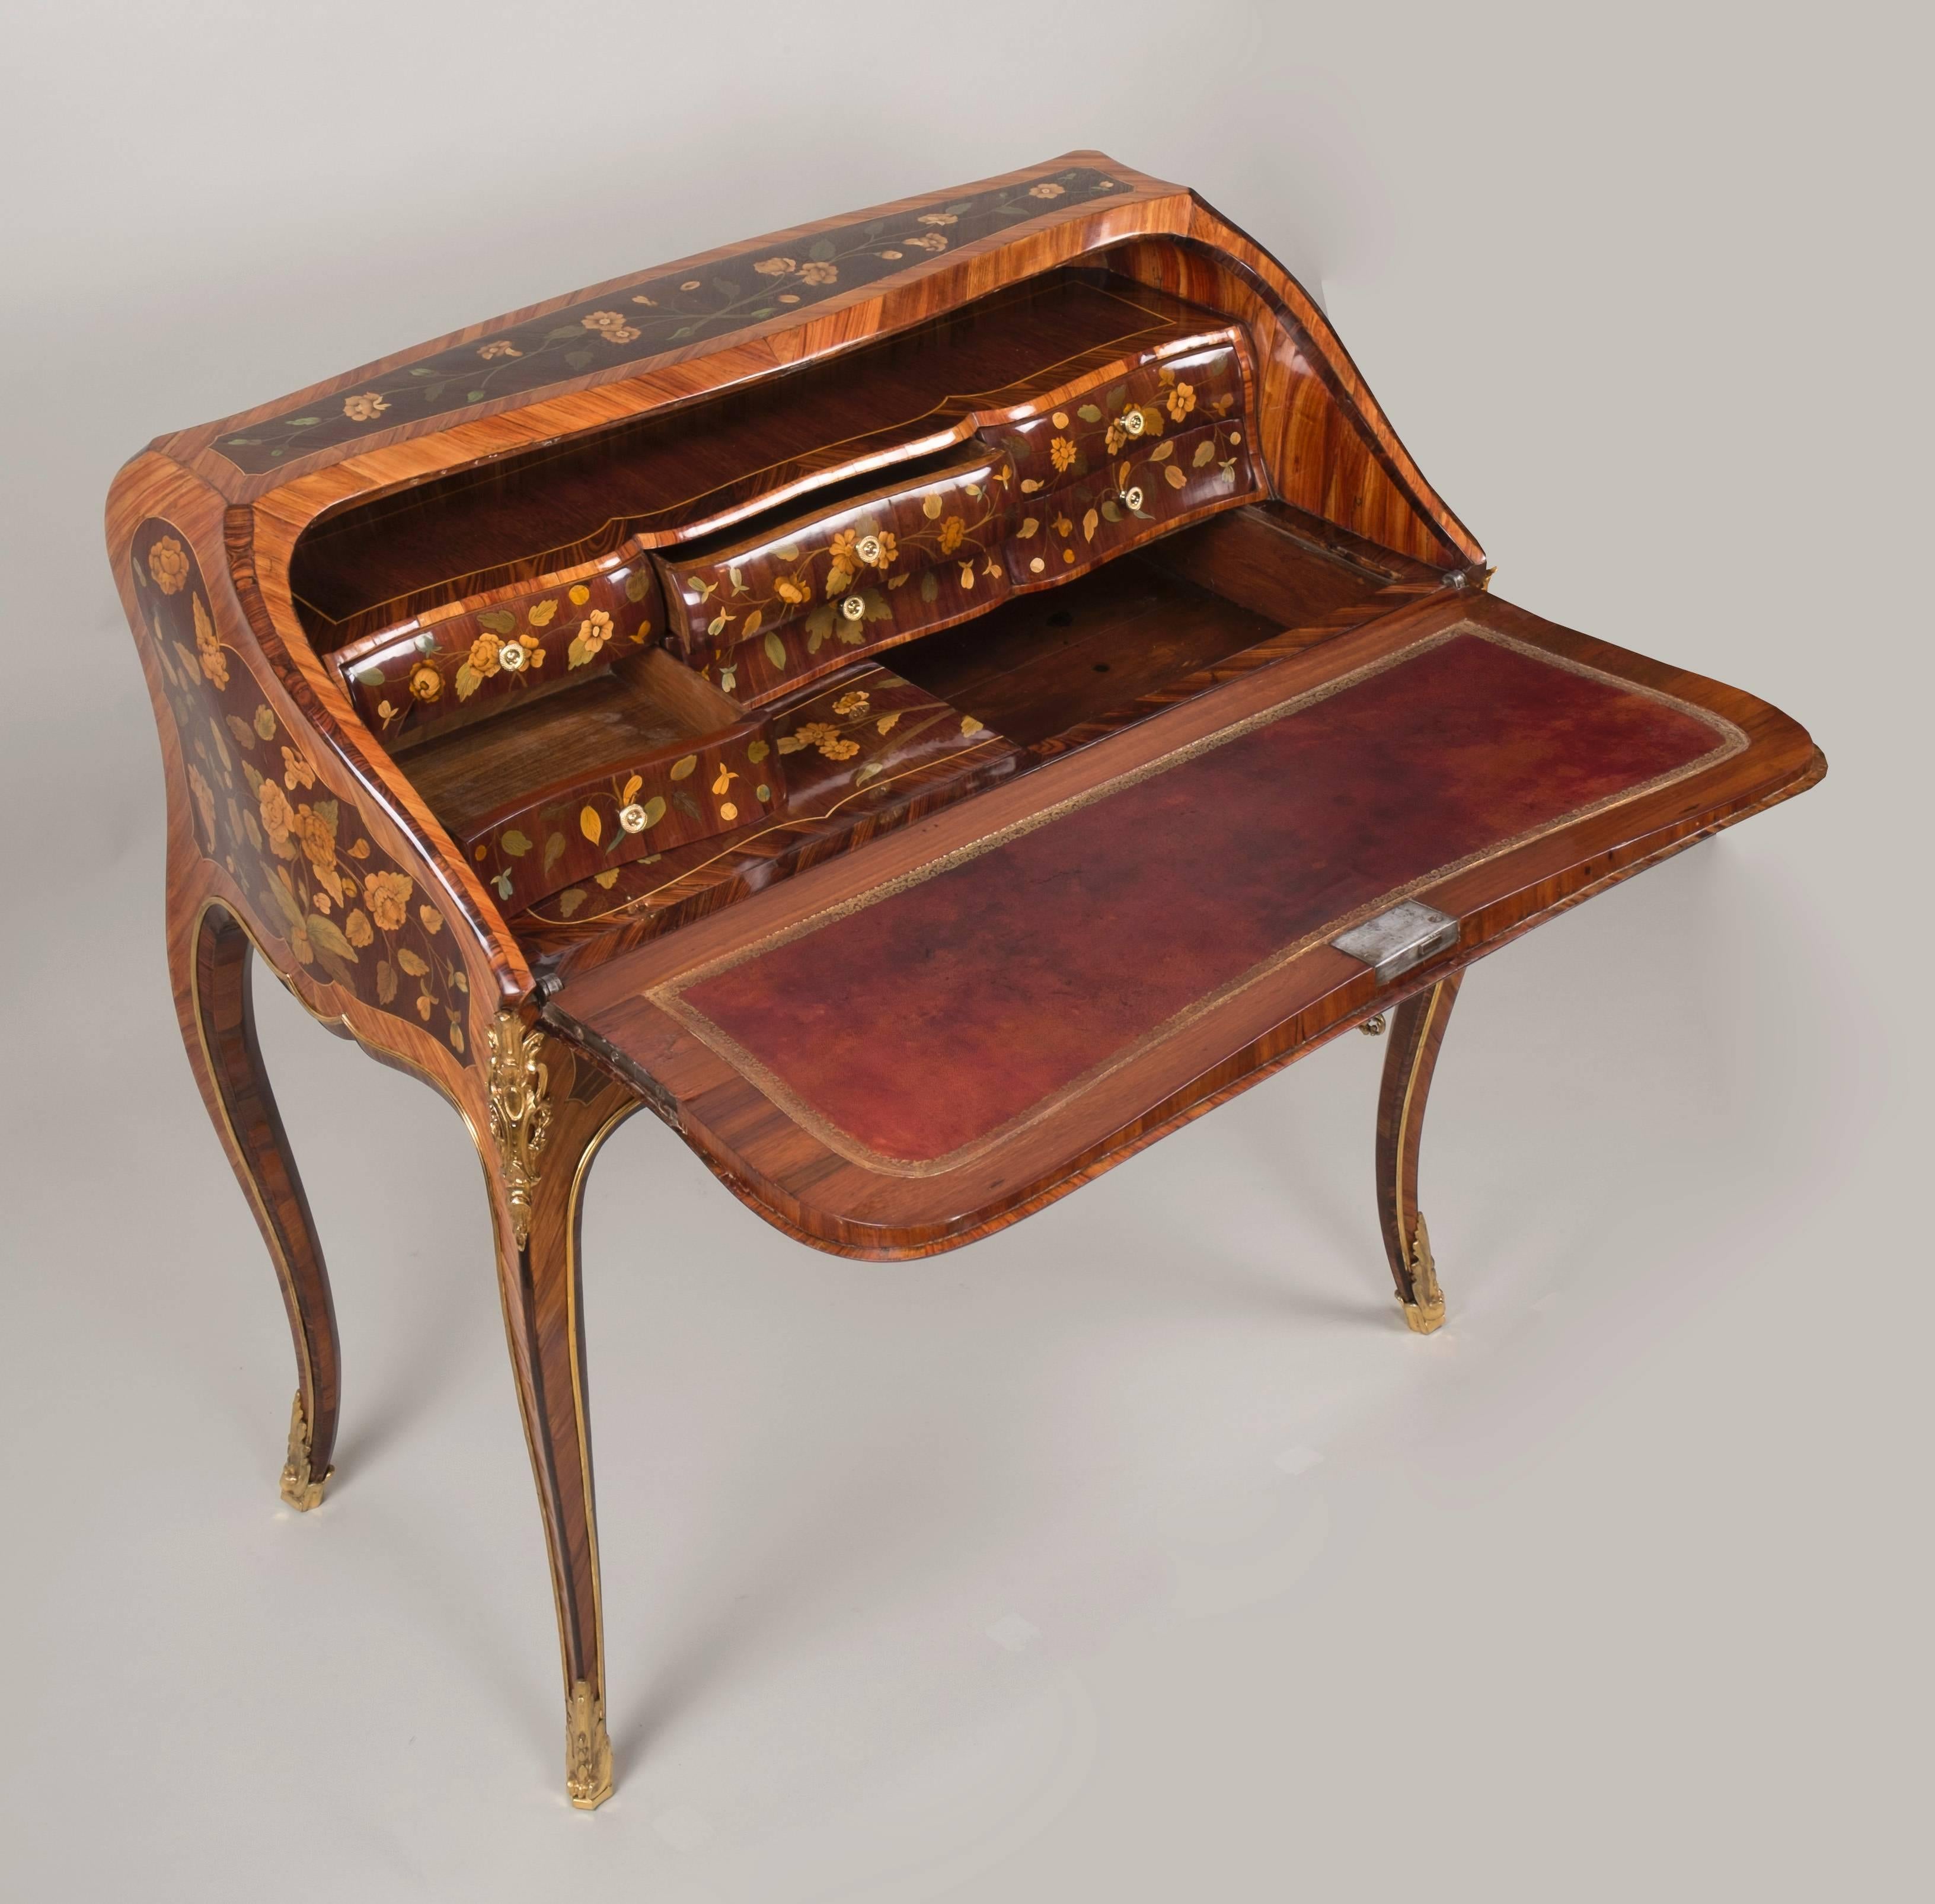 Louis XV "Dos d'ane" desk inlaid with amaranth and tulipwood, floral marquetry and attributes of music, curved faces.

Its interior has six curved drawers and a false bottom which are decorated with a floral marquetry.

Work from Louis